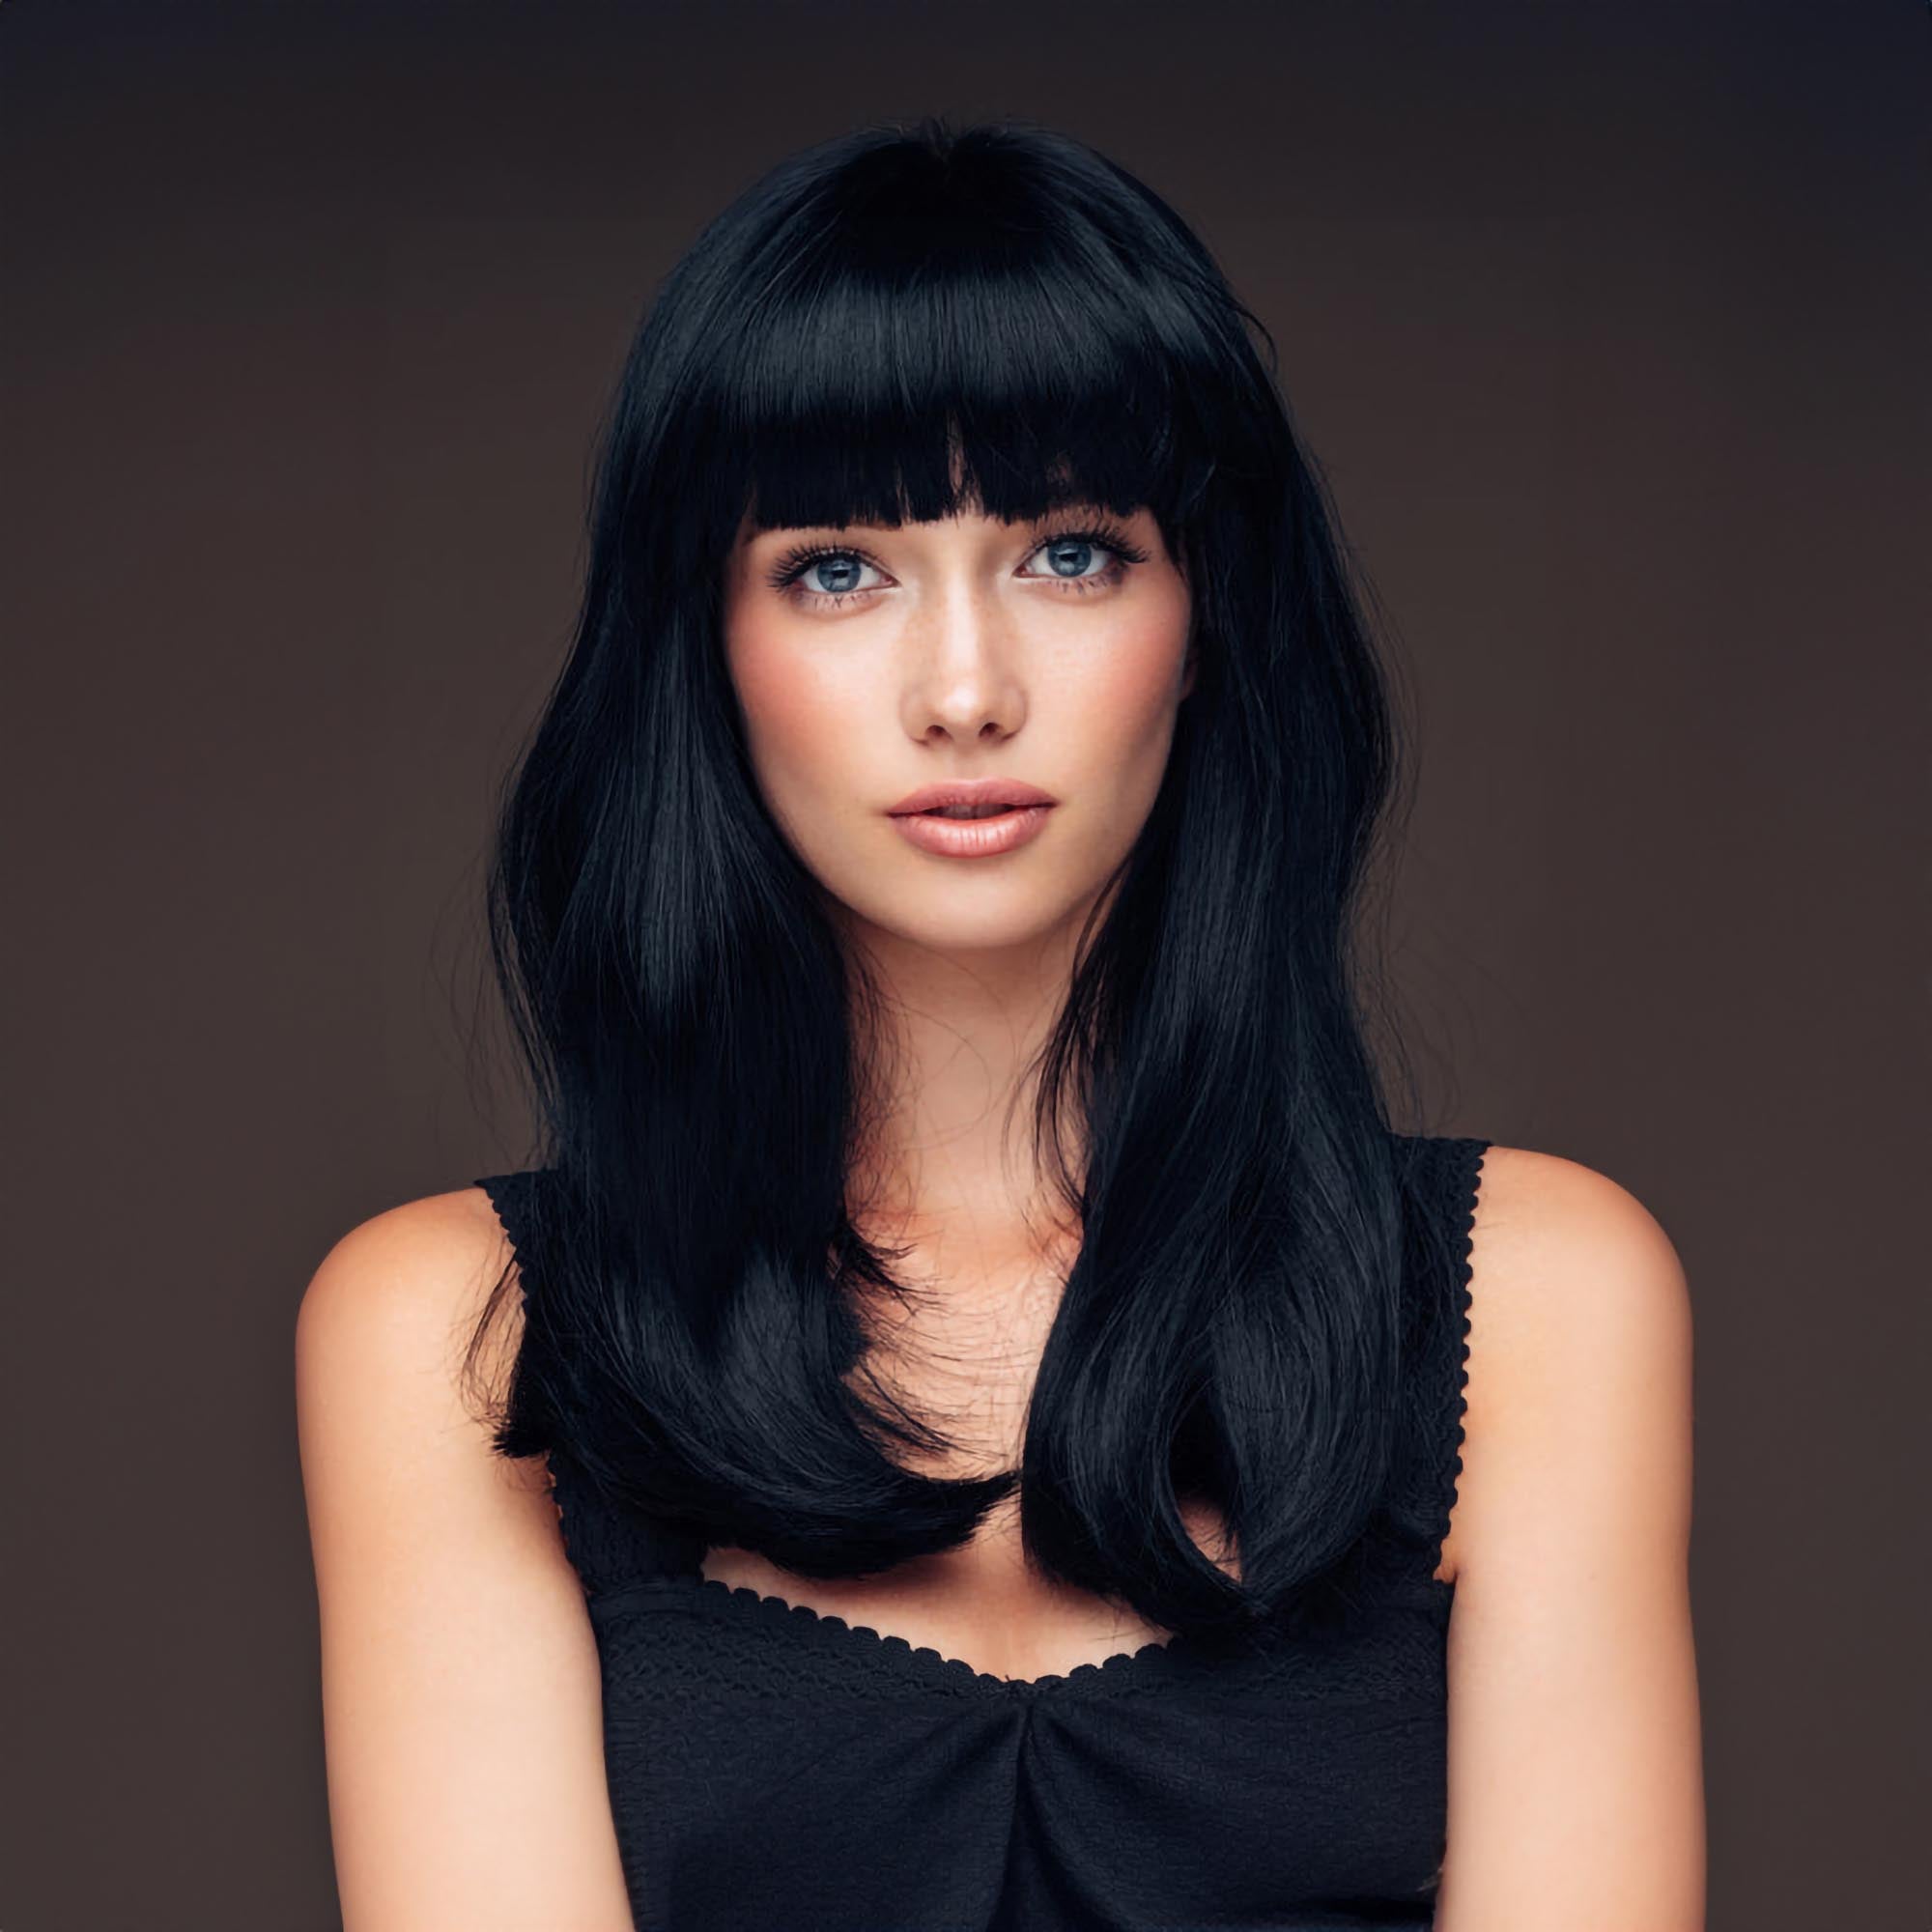 Modern Color 3-in-1 Color Refresh Cleanse Condition - Onyx / ONYX